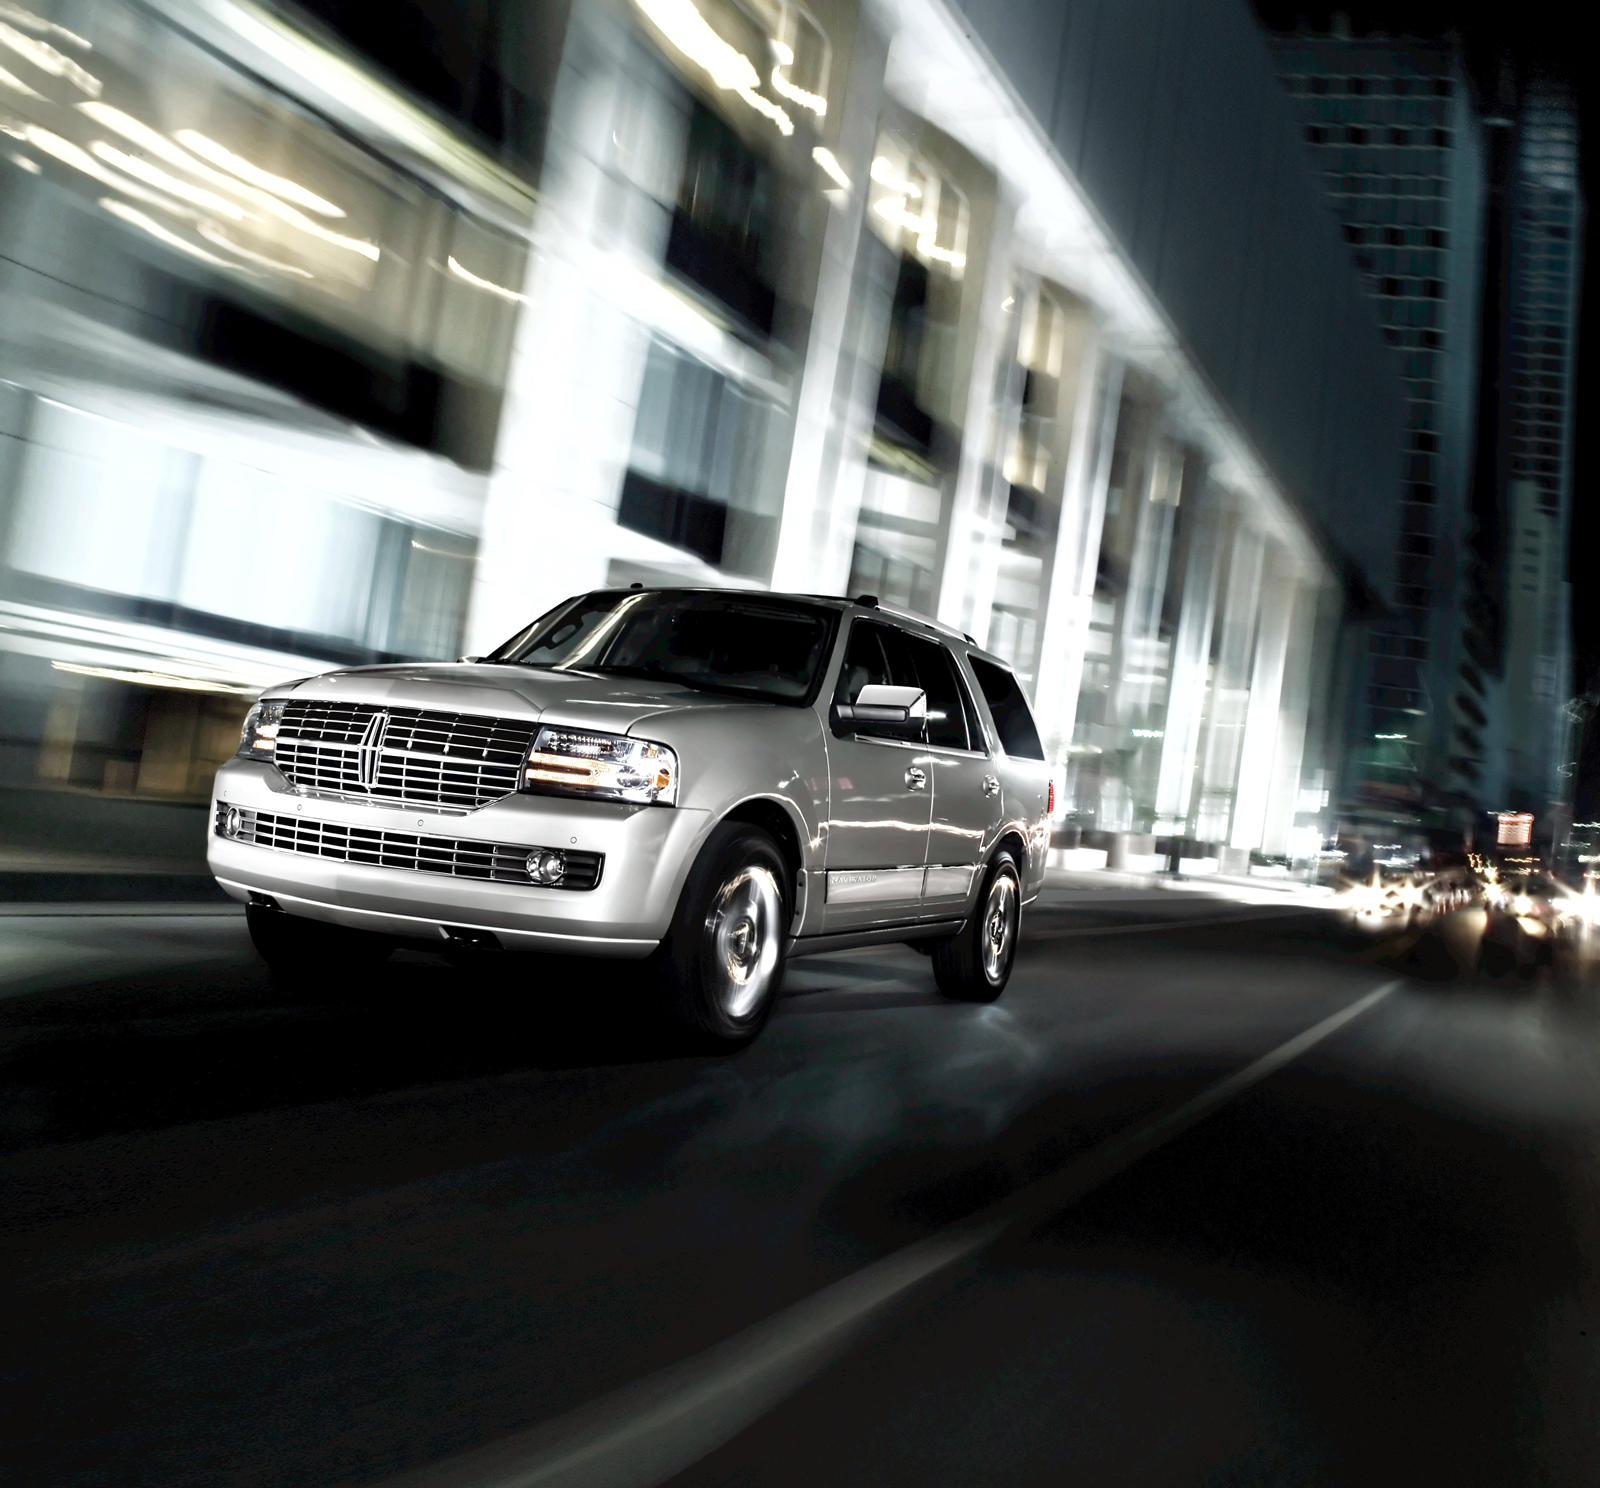 2012 Lincoln Navigator Front View Driving